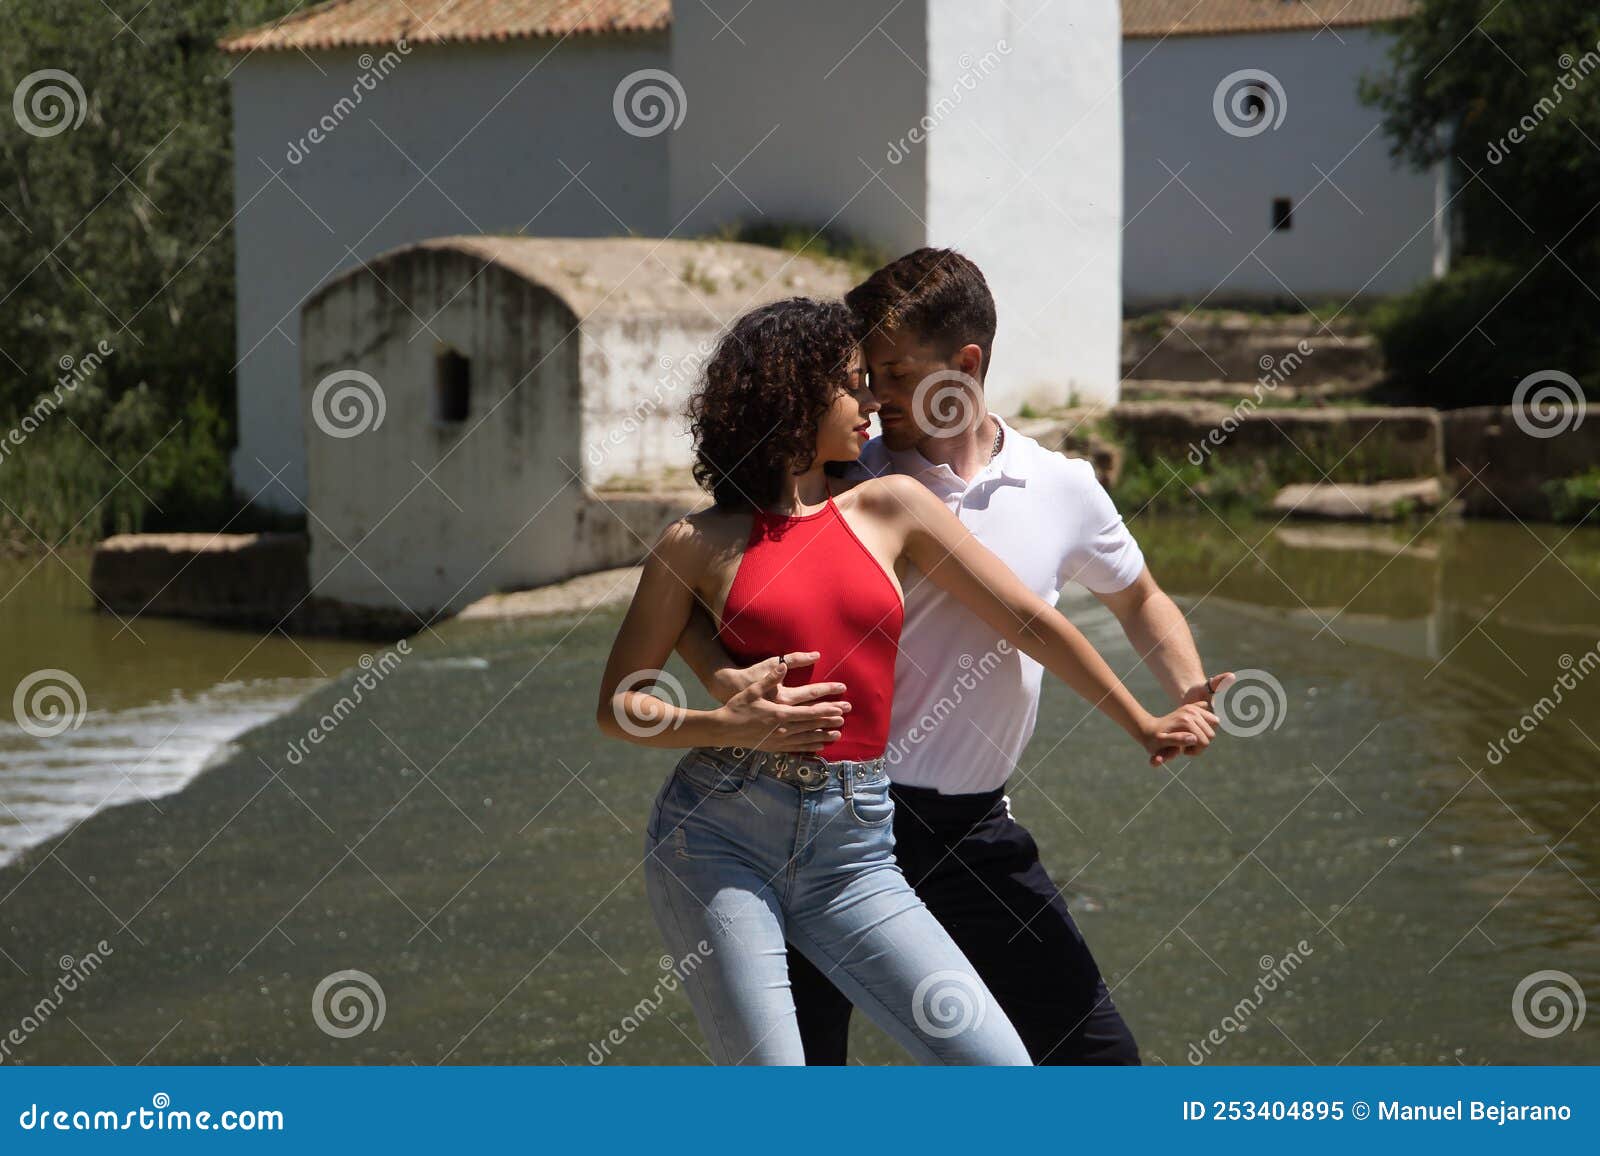 Attractive Young Couple Dancing Sensual Bachata On A Stone Floor In An Outdoor Park Next To A